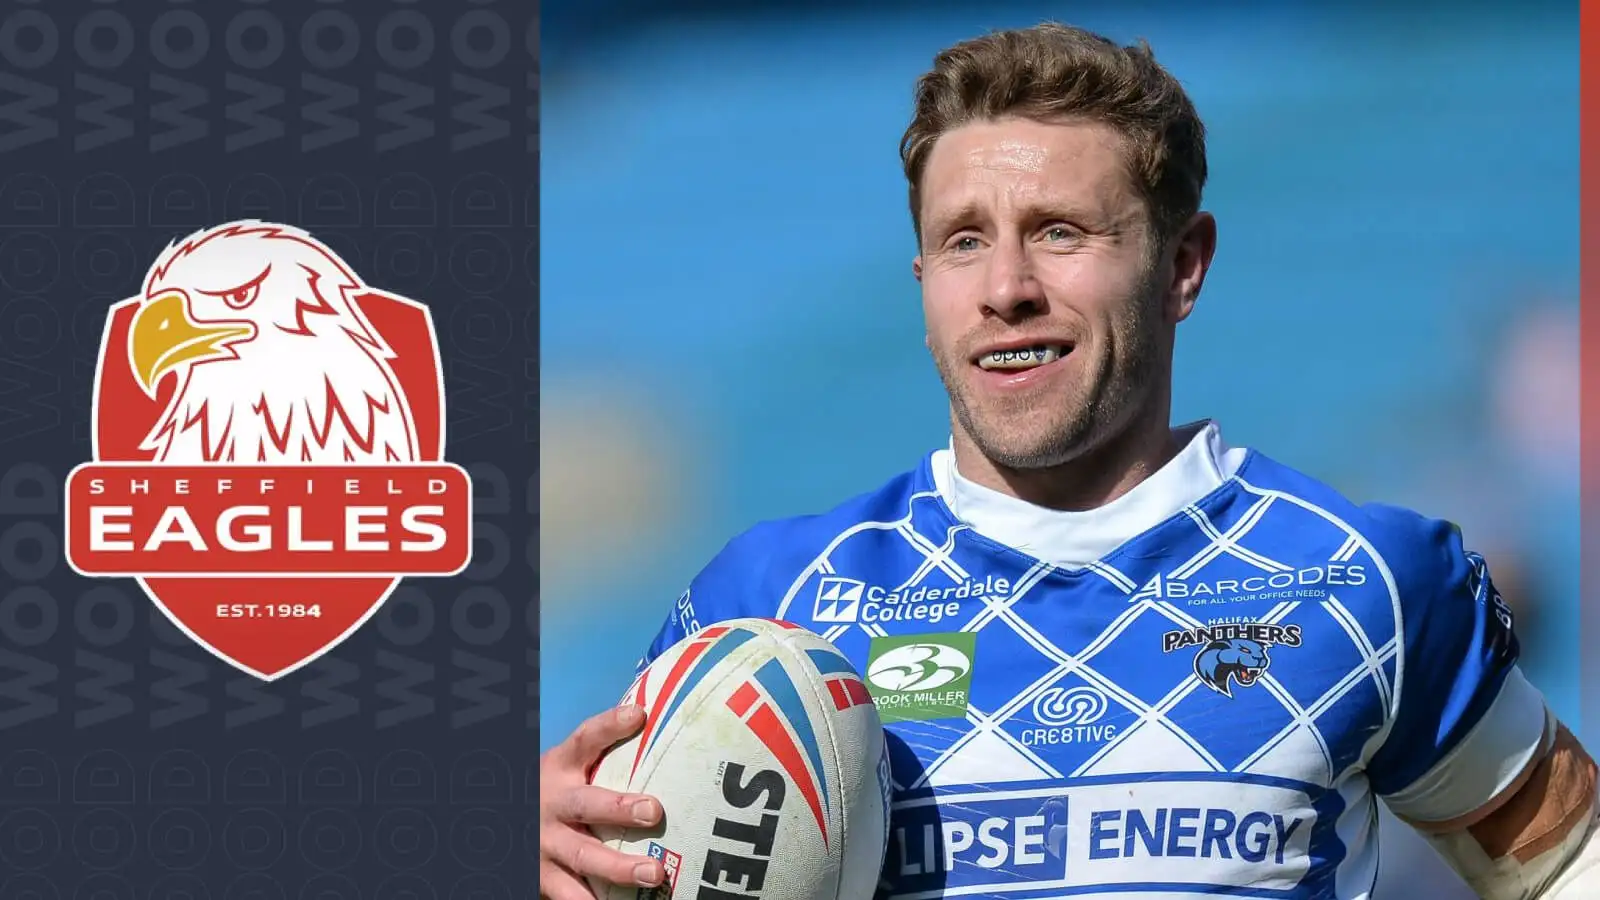 Sheffield Eagles swoop to make double signing, including former Super League hooker who makes retirement u-turn